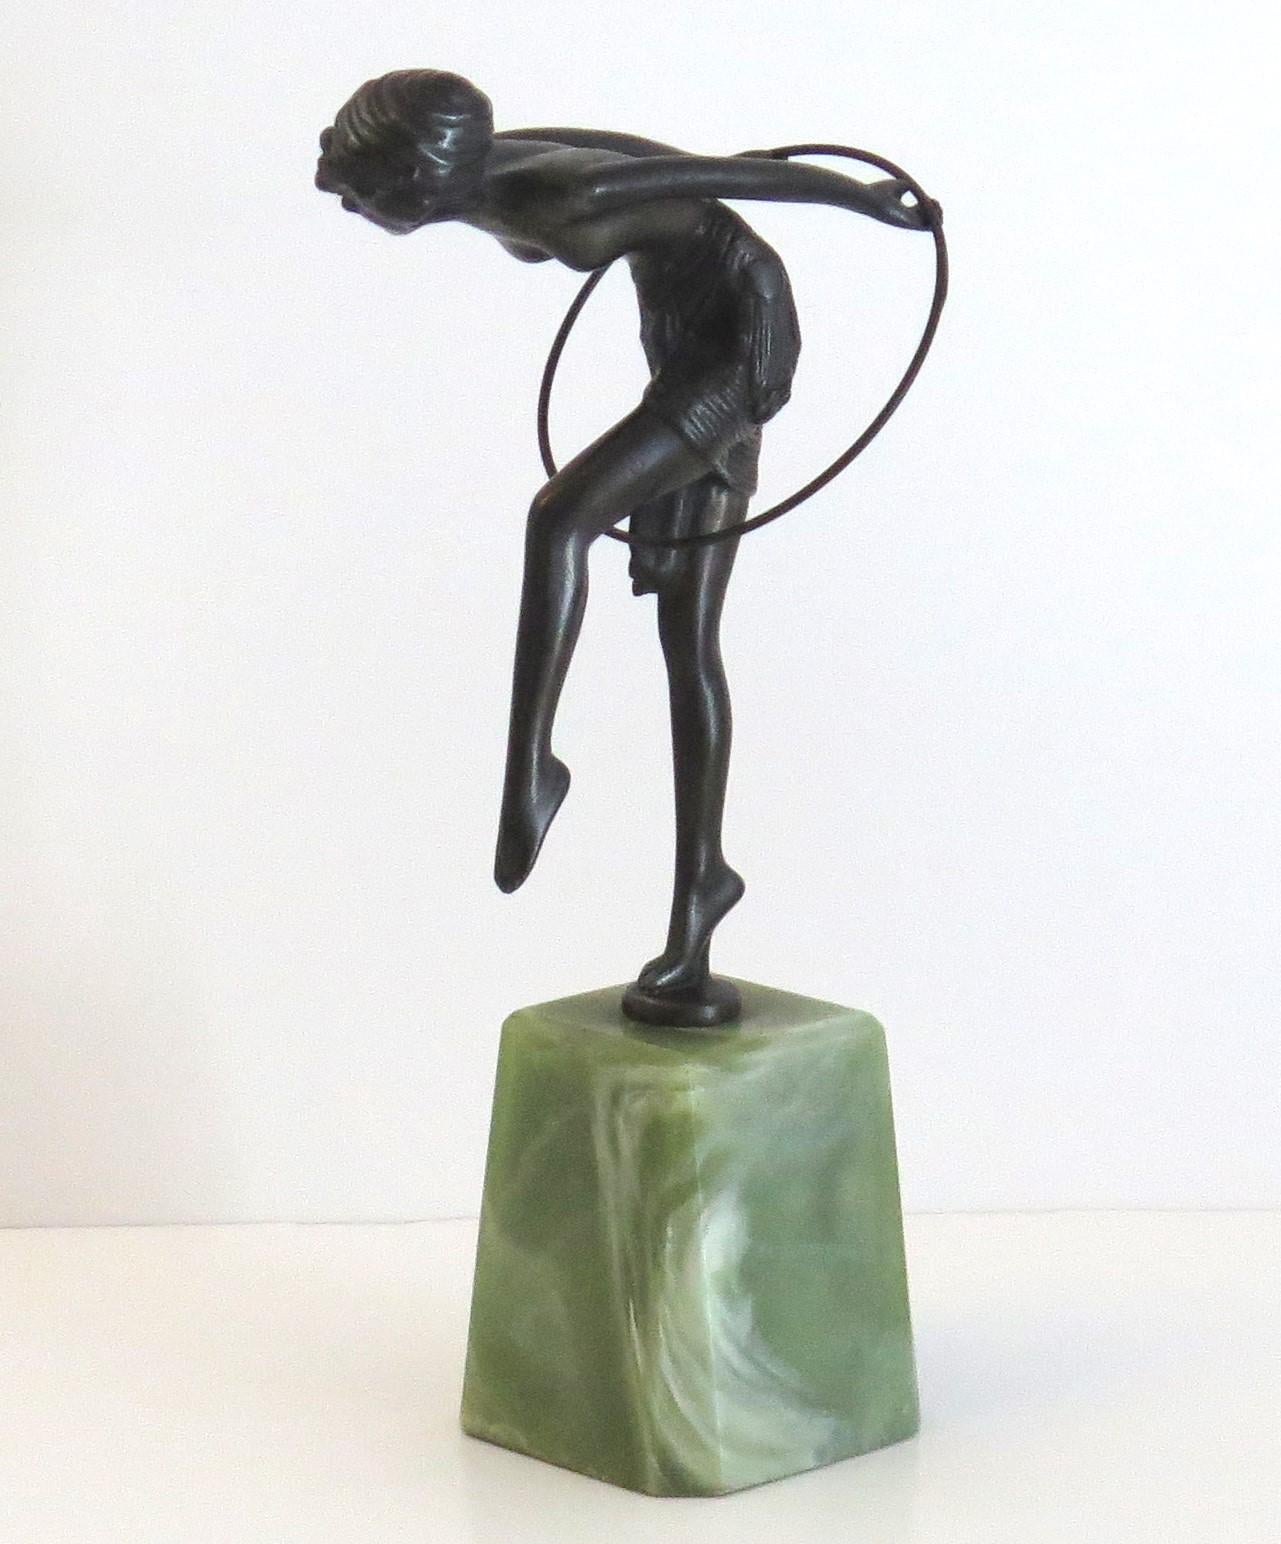 Hand-Crafted Bronze Figurine Sculpture Hoop Dancer After D H Chiparus, Art Deco Circa 1920s For Sale